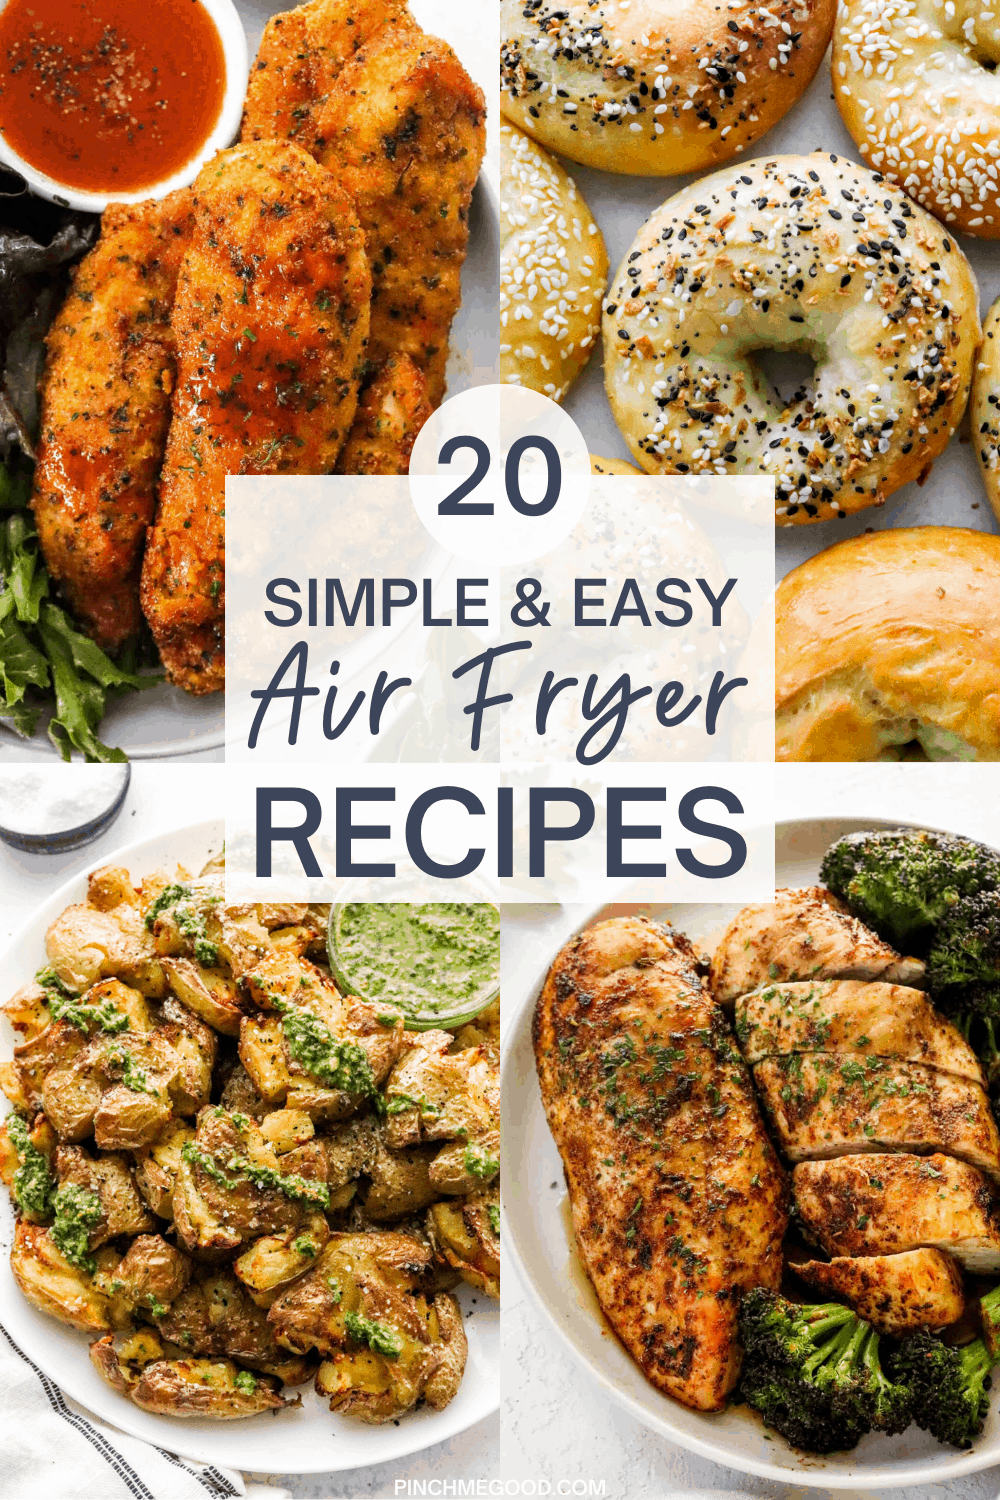 20 Simple and Easy Air Fryer Recipes - Pinch Me Good